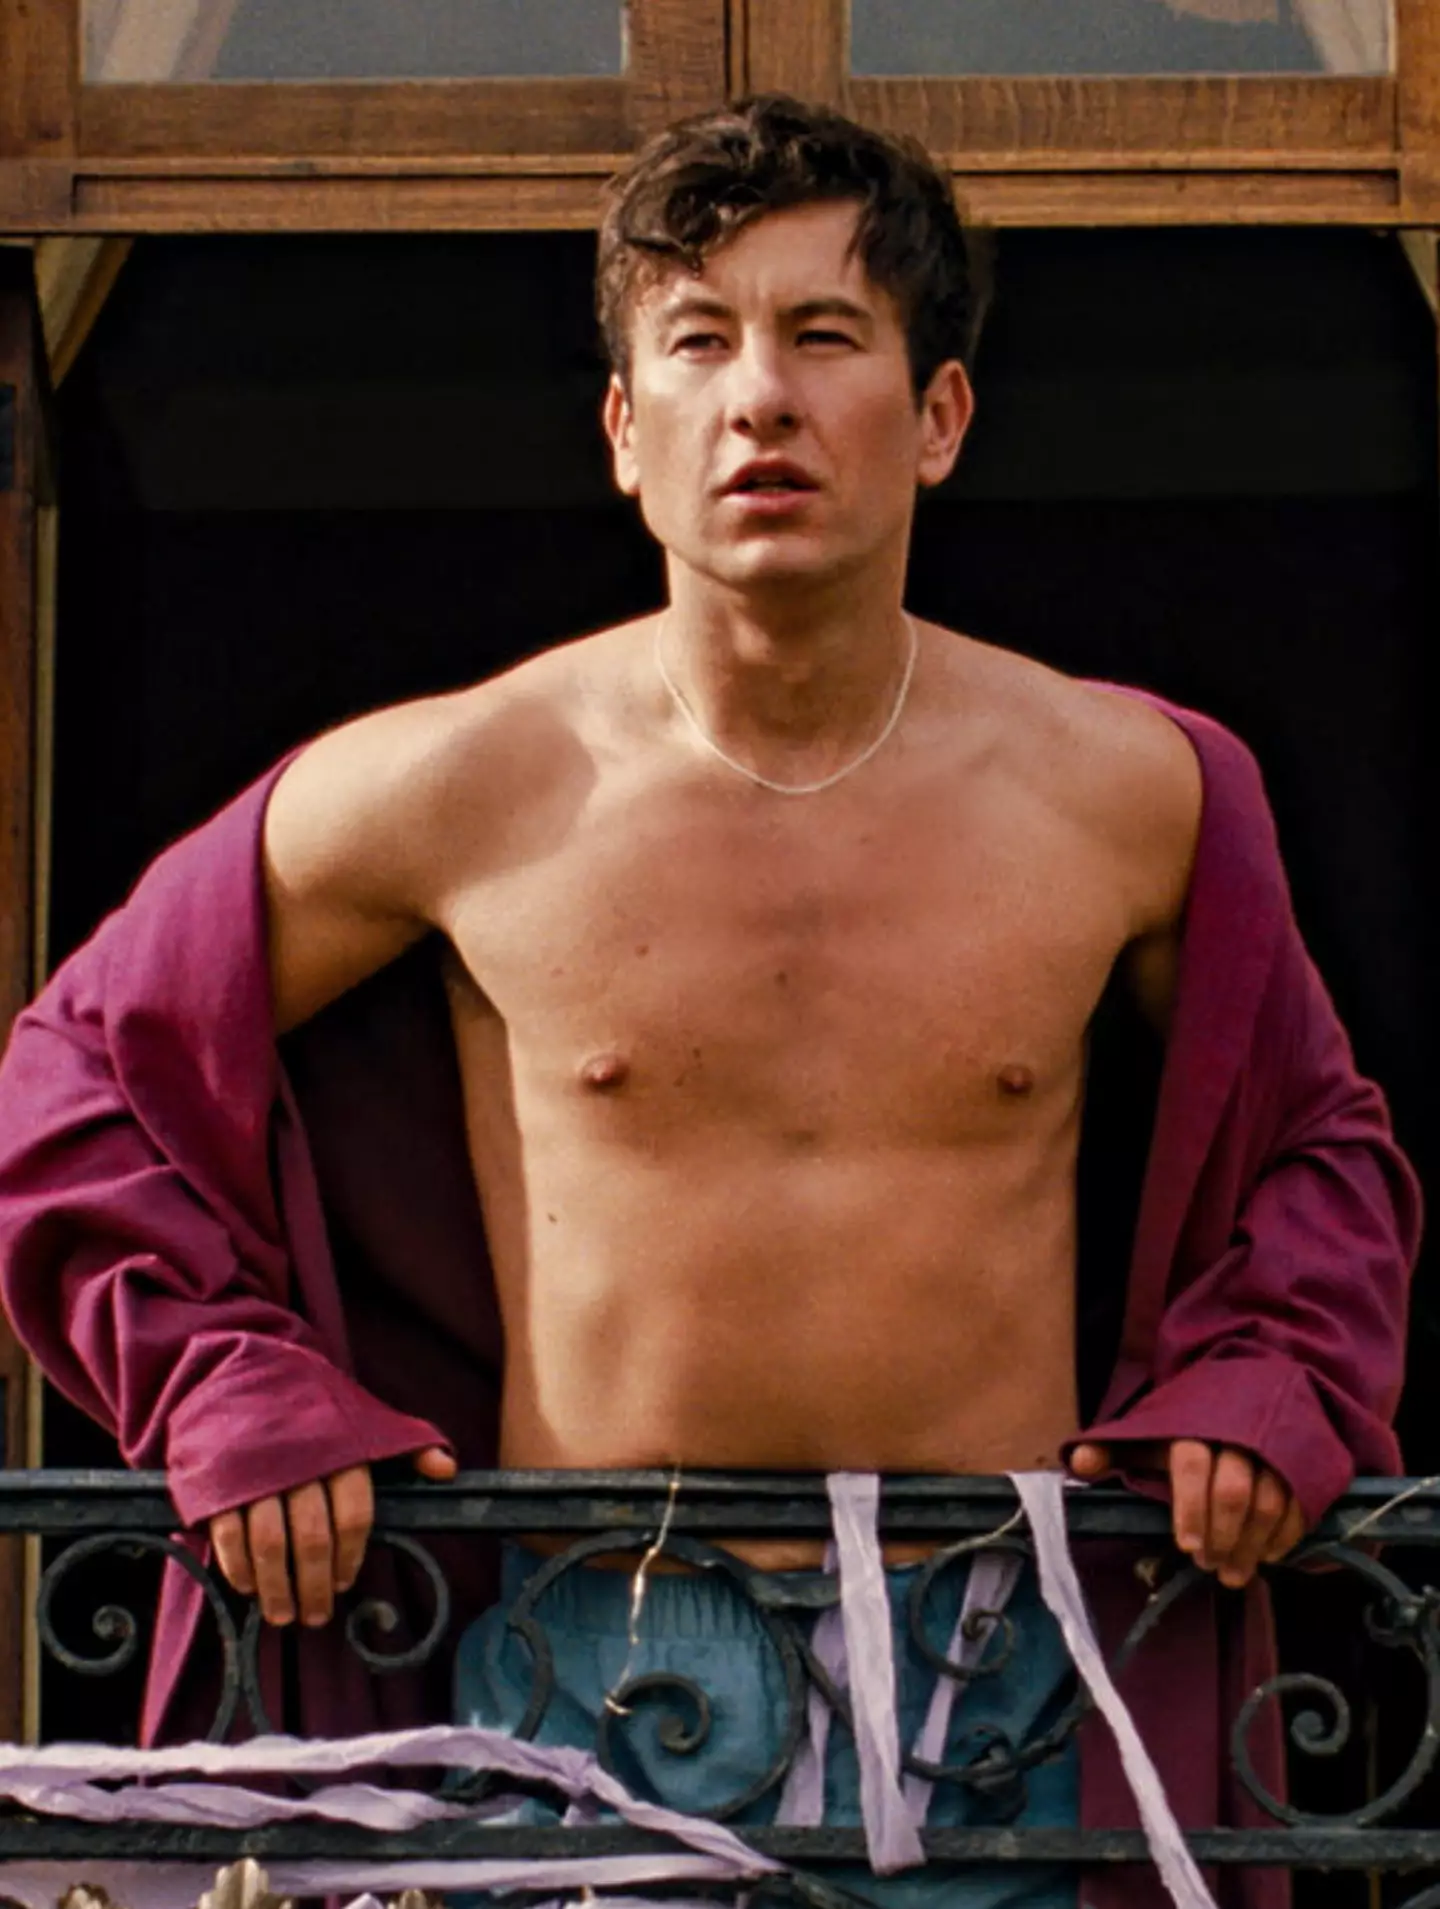 Barry Keoghan slurped up a concoction in a shocking scene.